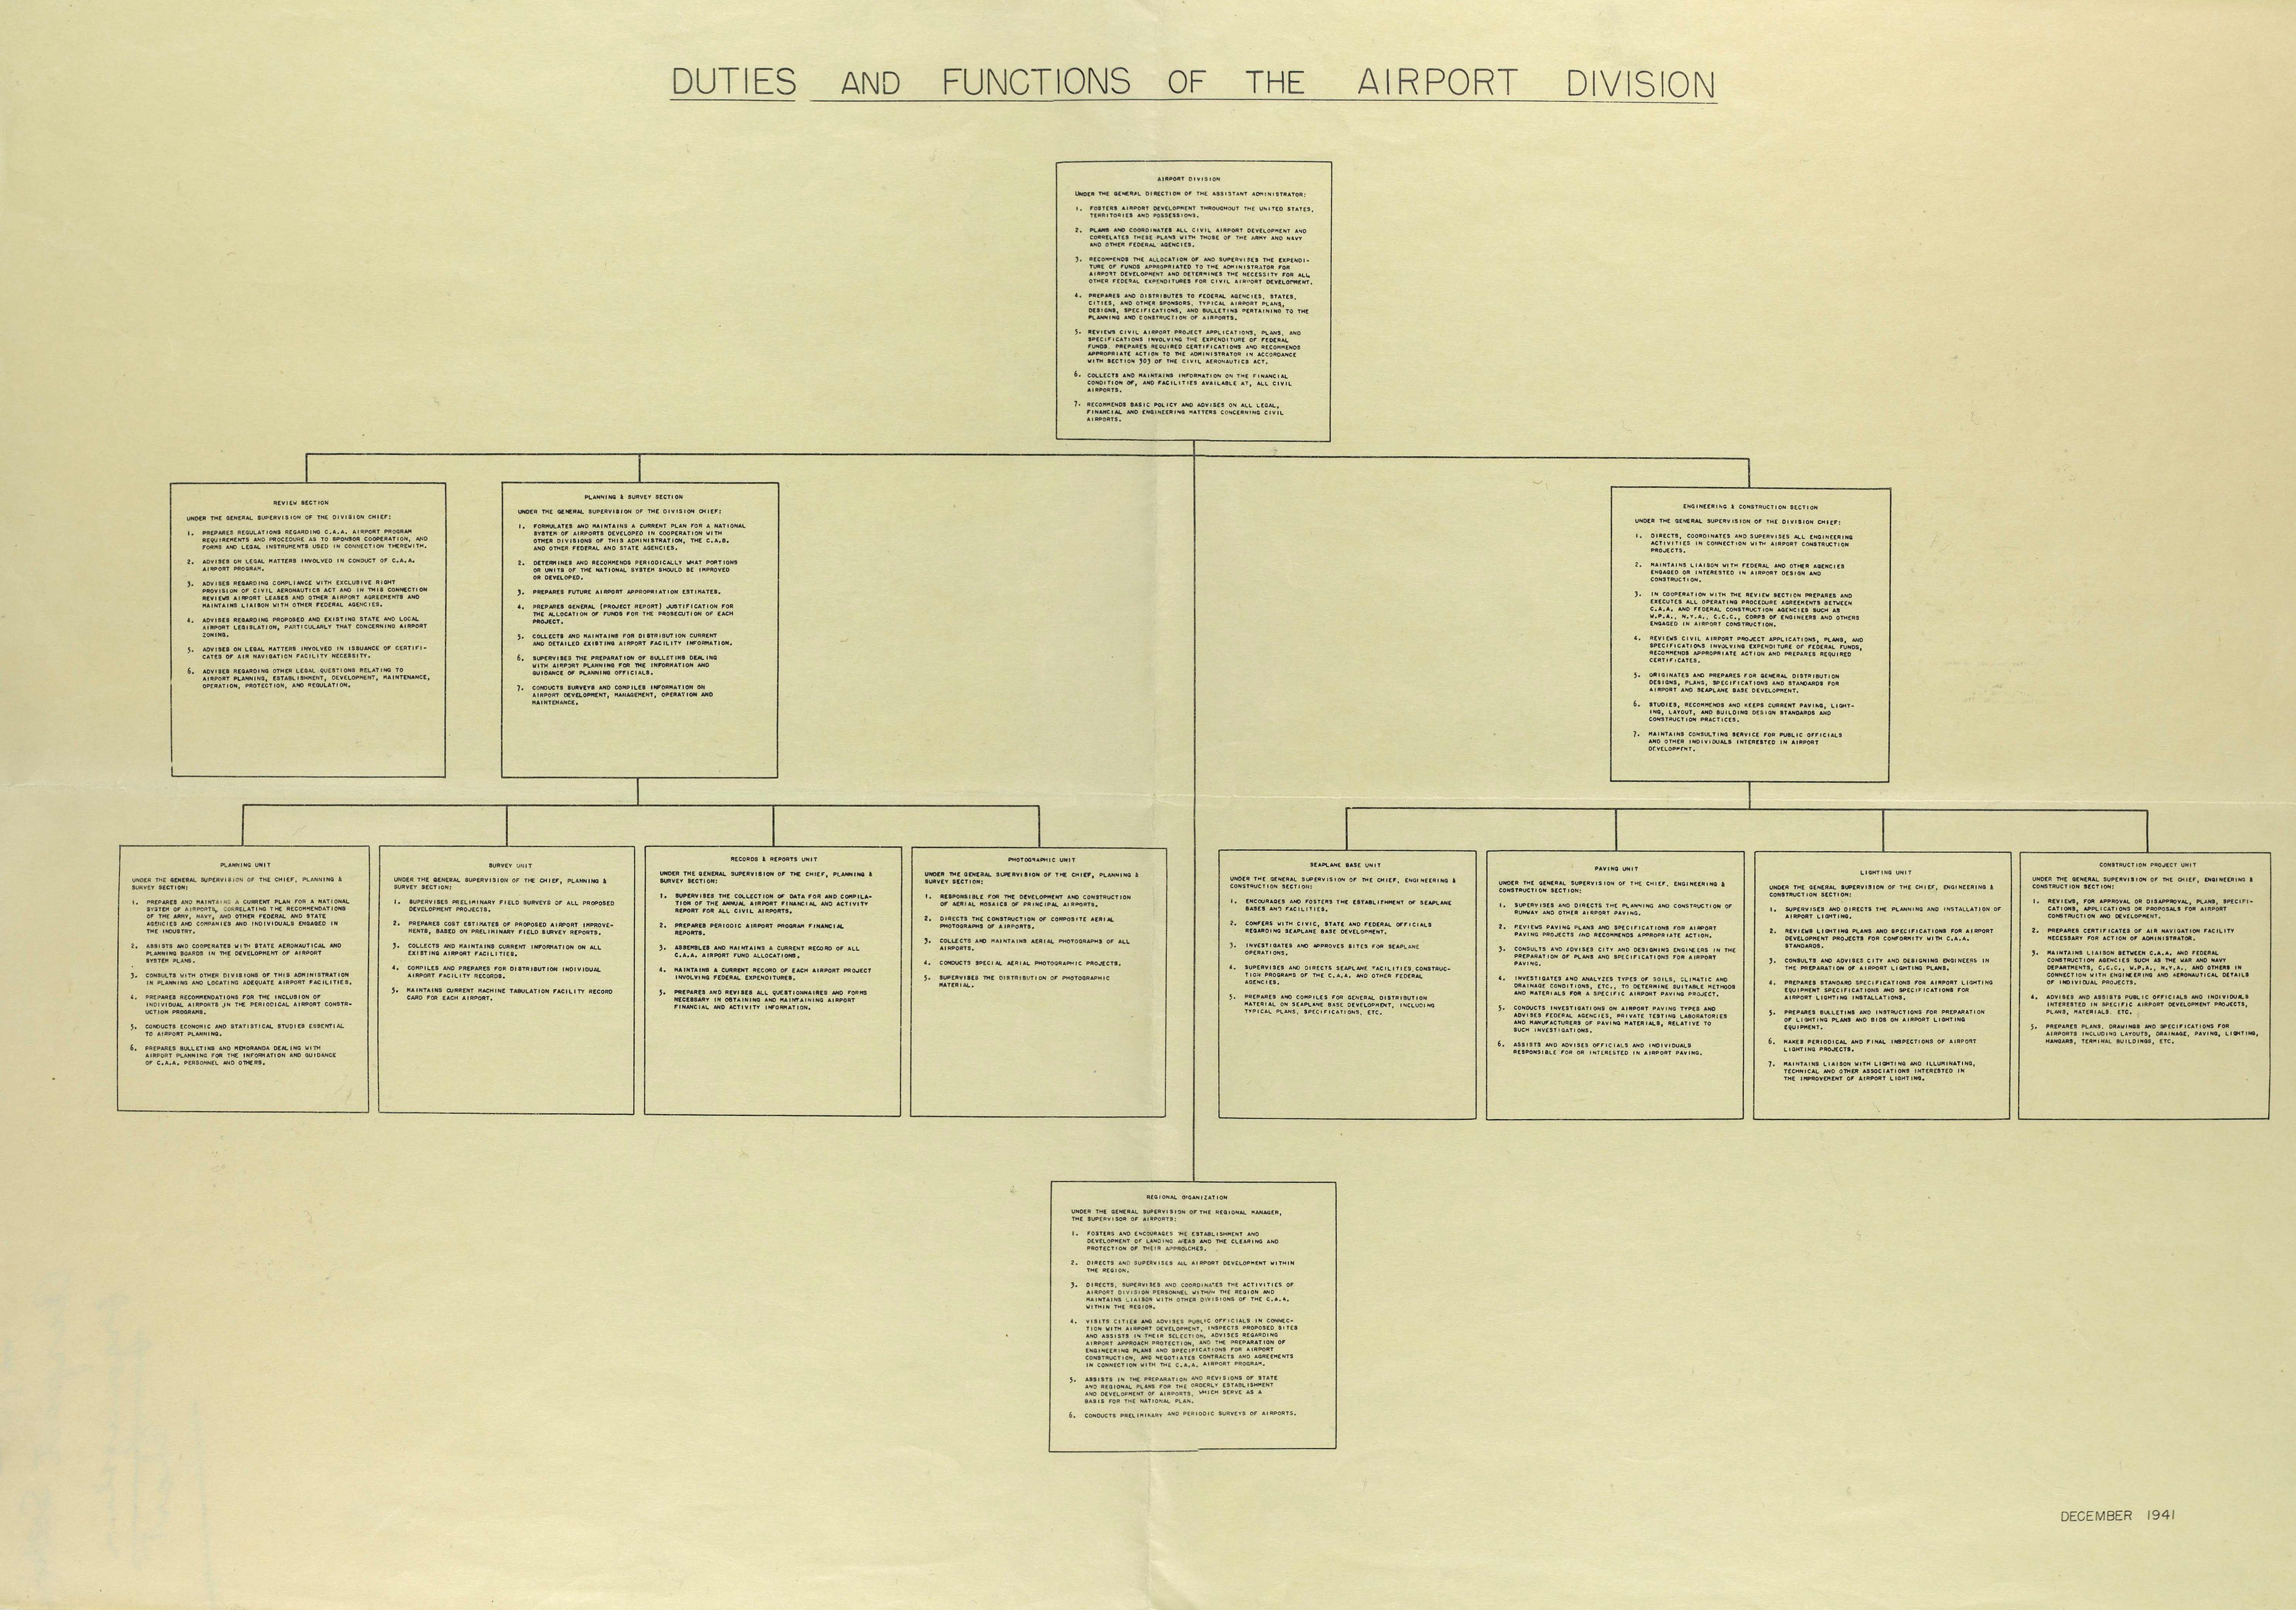 Duties and Functions of the Airport Division